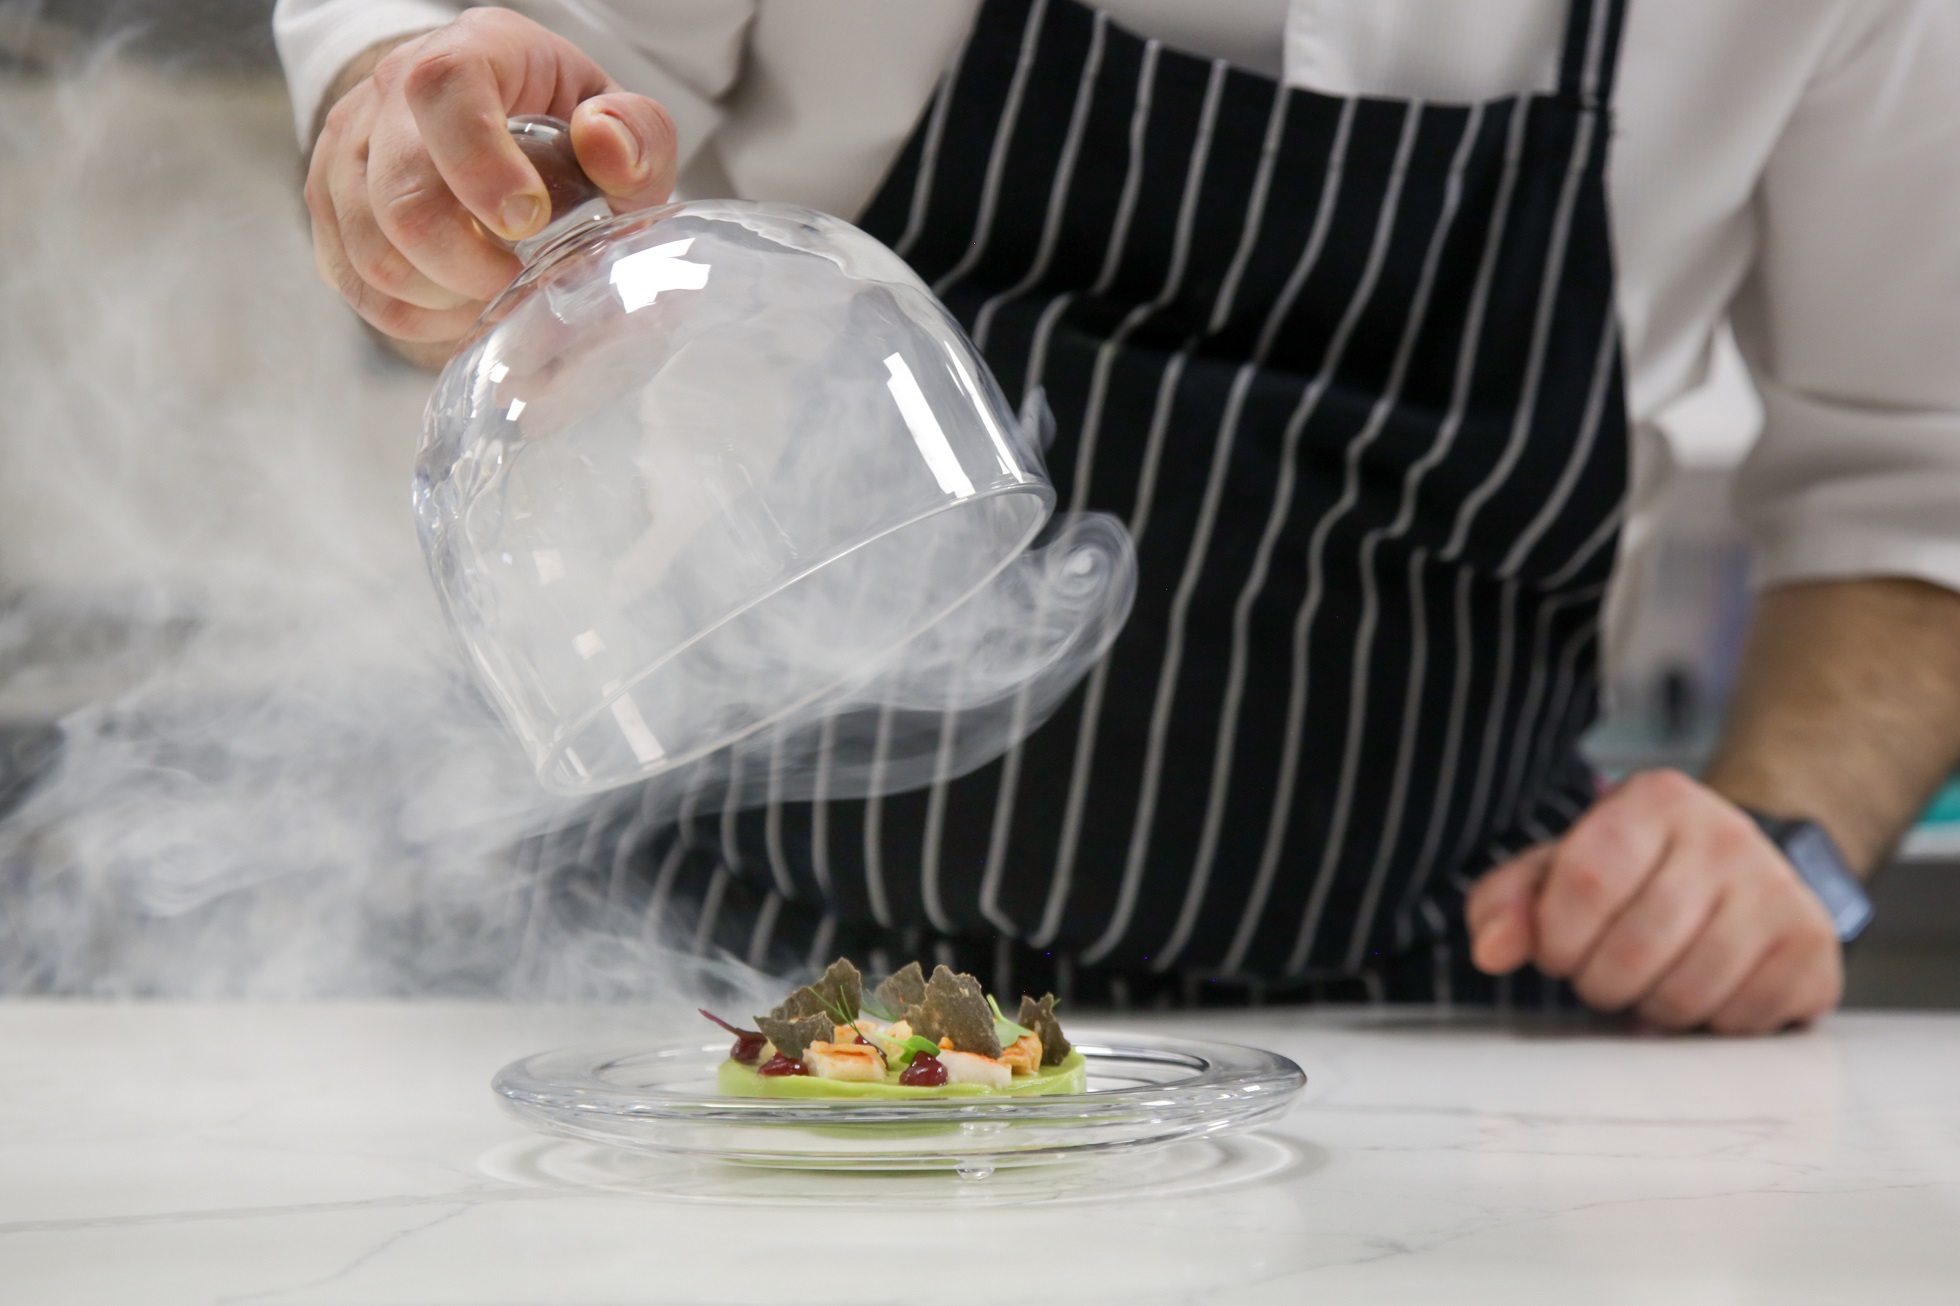 Chef's hand lifts up glass cloche from a plate with hot food and moving smoke at the restaurant